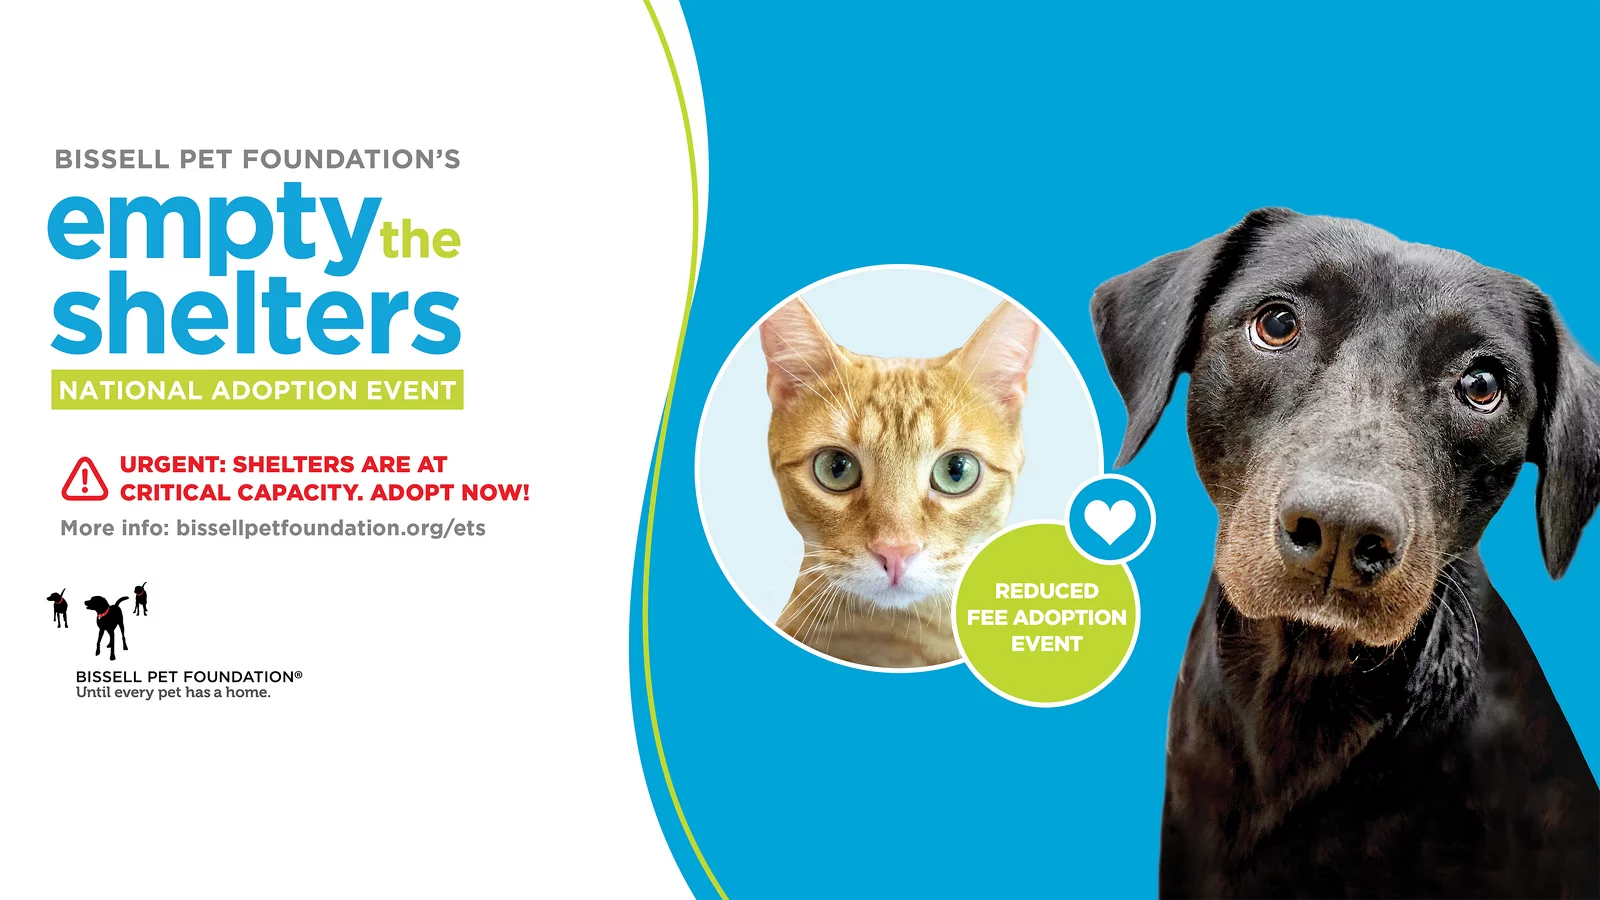 Brown lab mix and orange tabby cat pose to promote Fall National Empty the Shelters